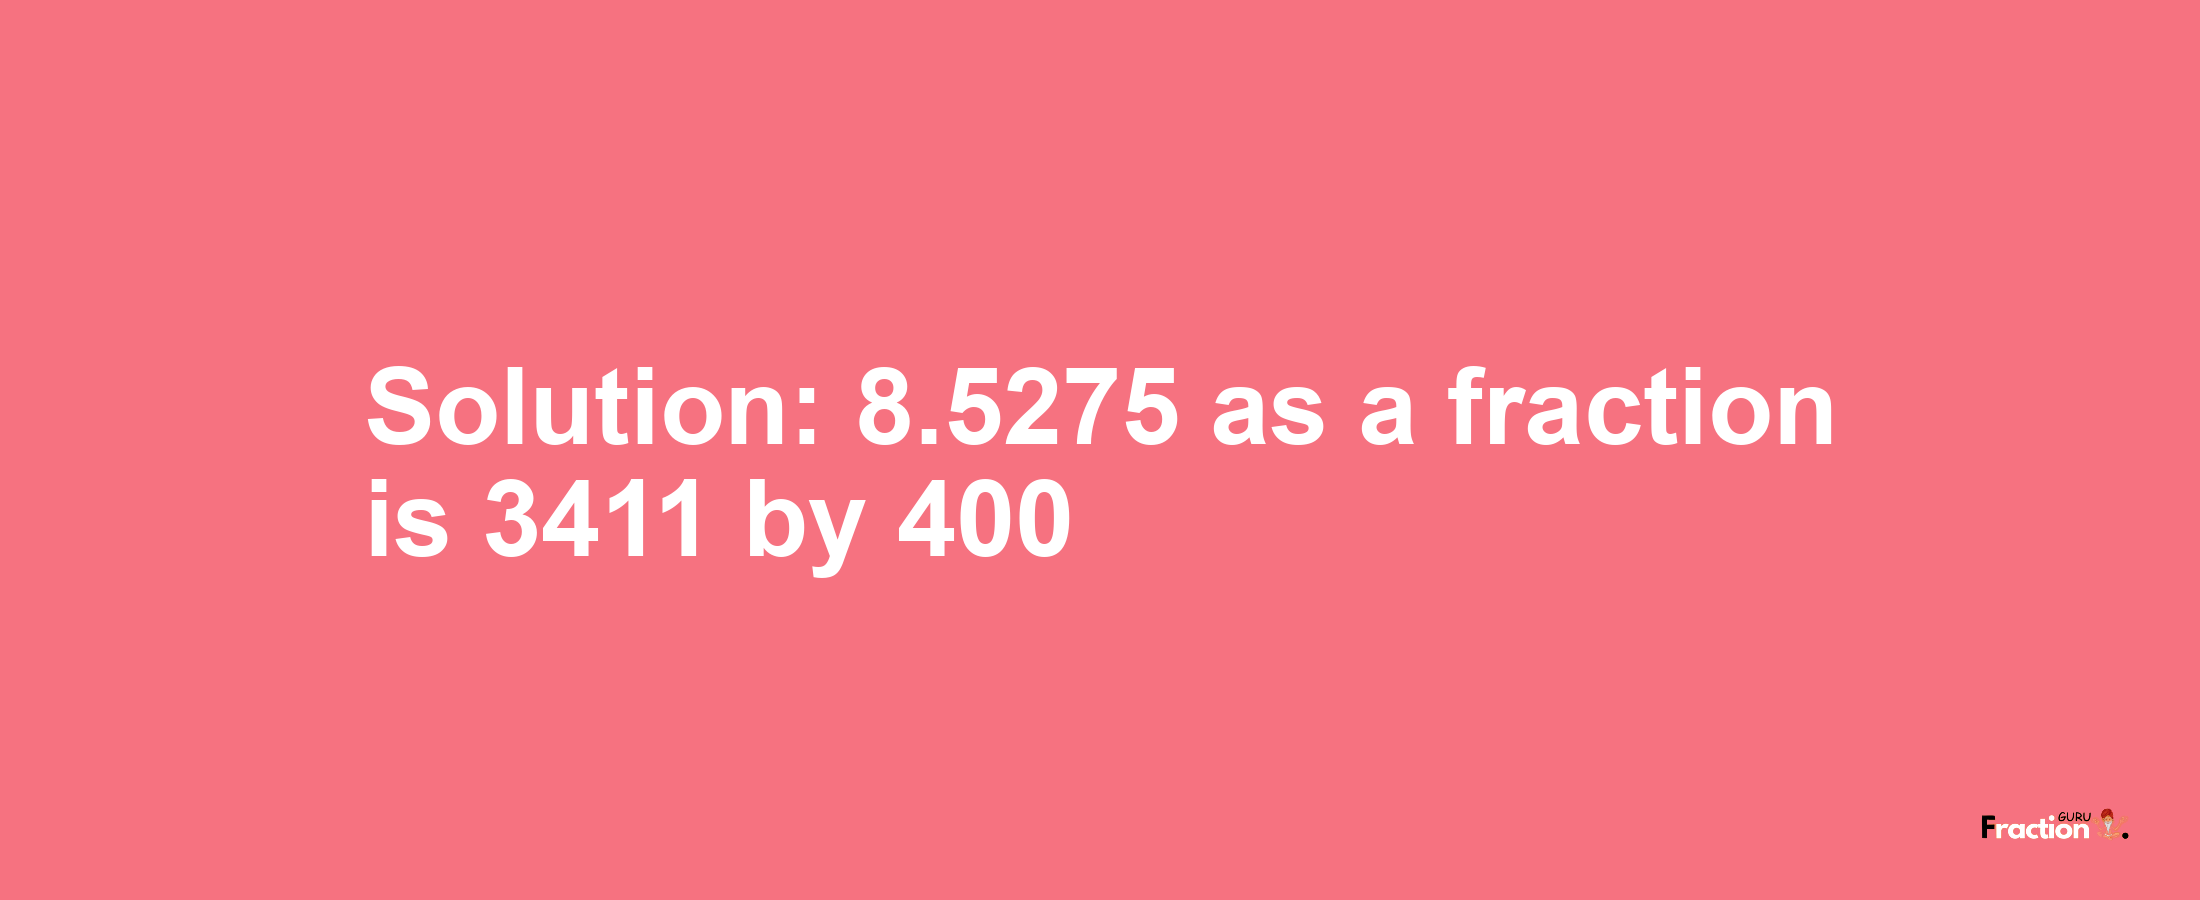 Solution:8.5275 as a fraction is 3411/400